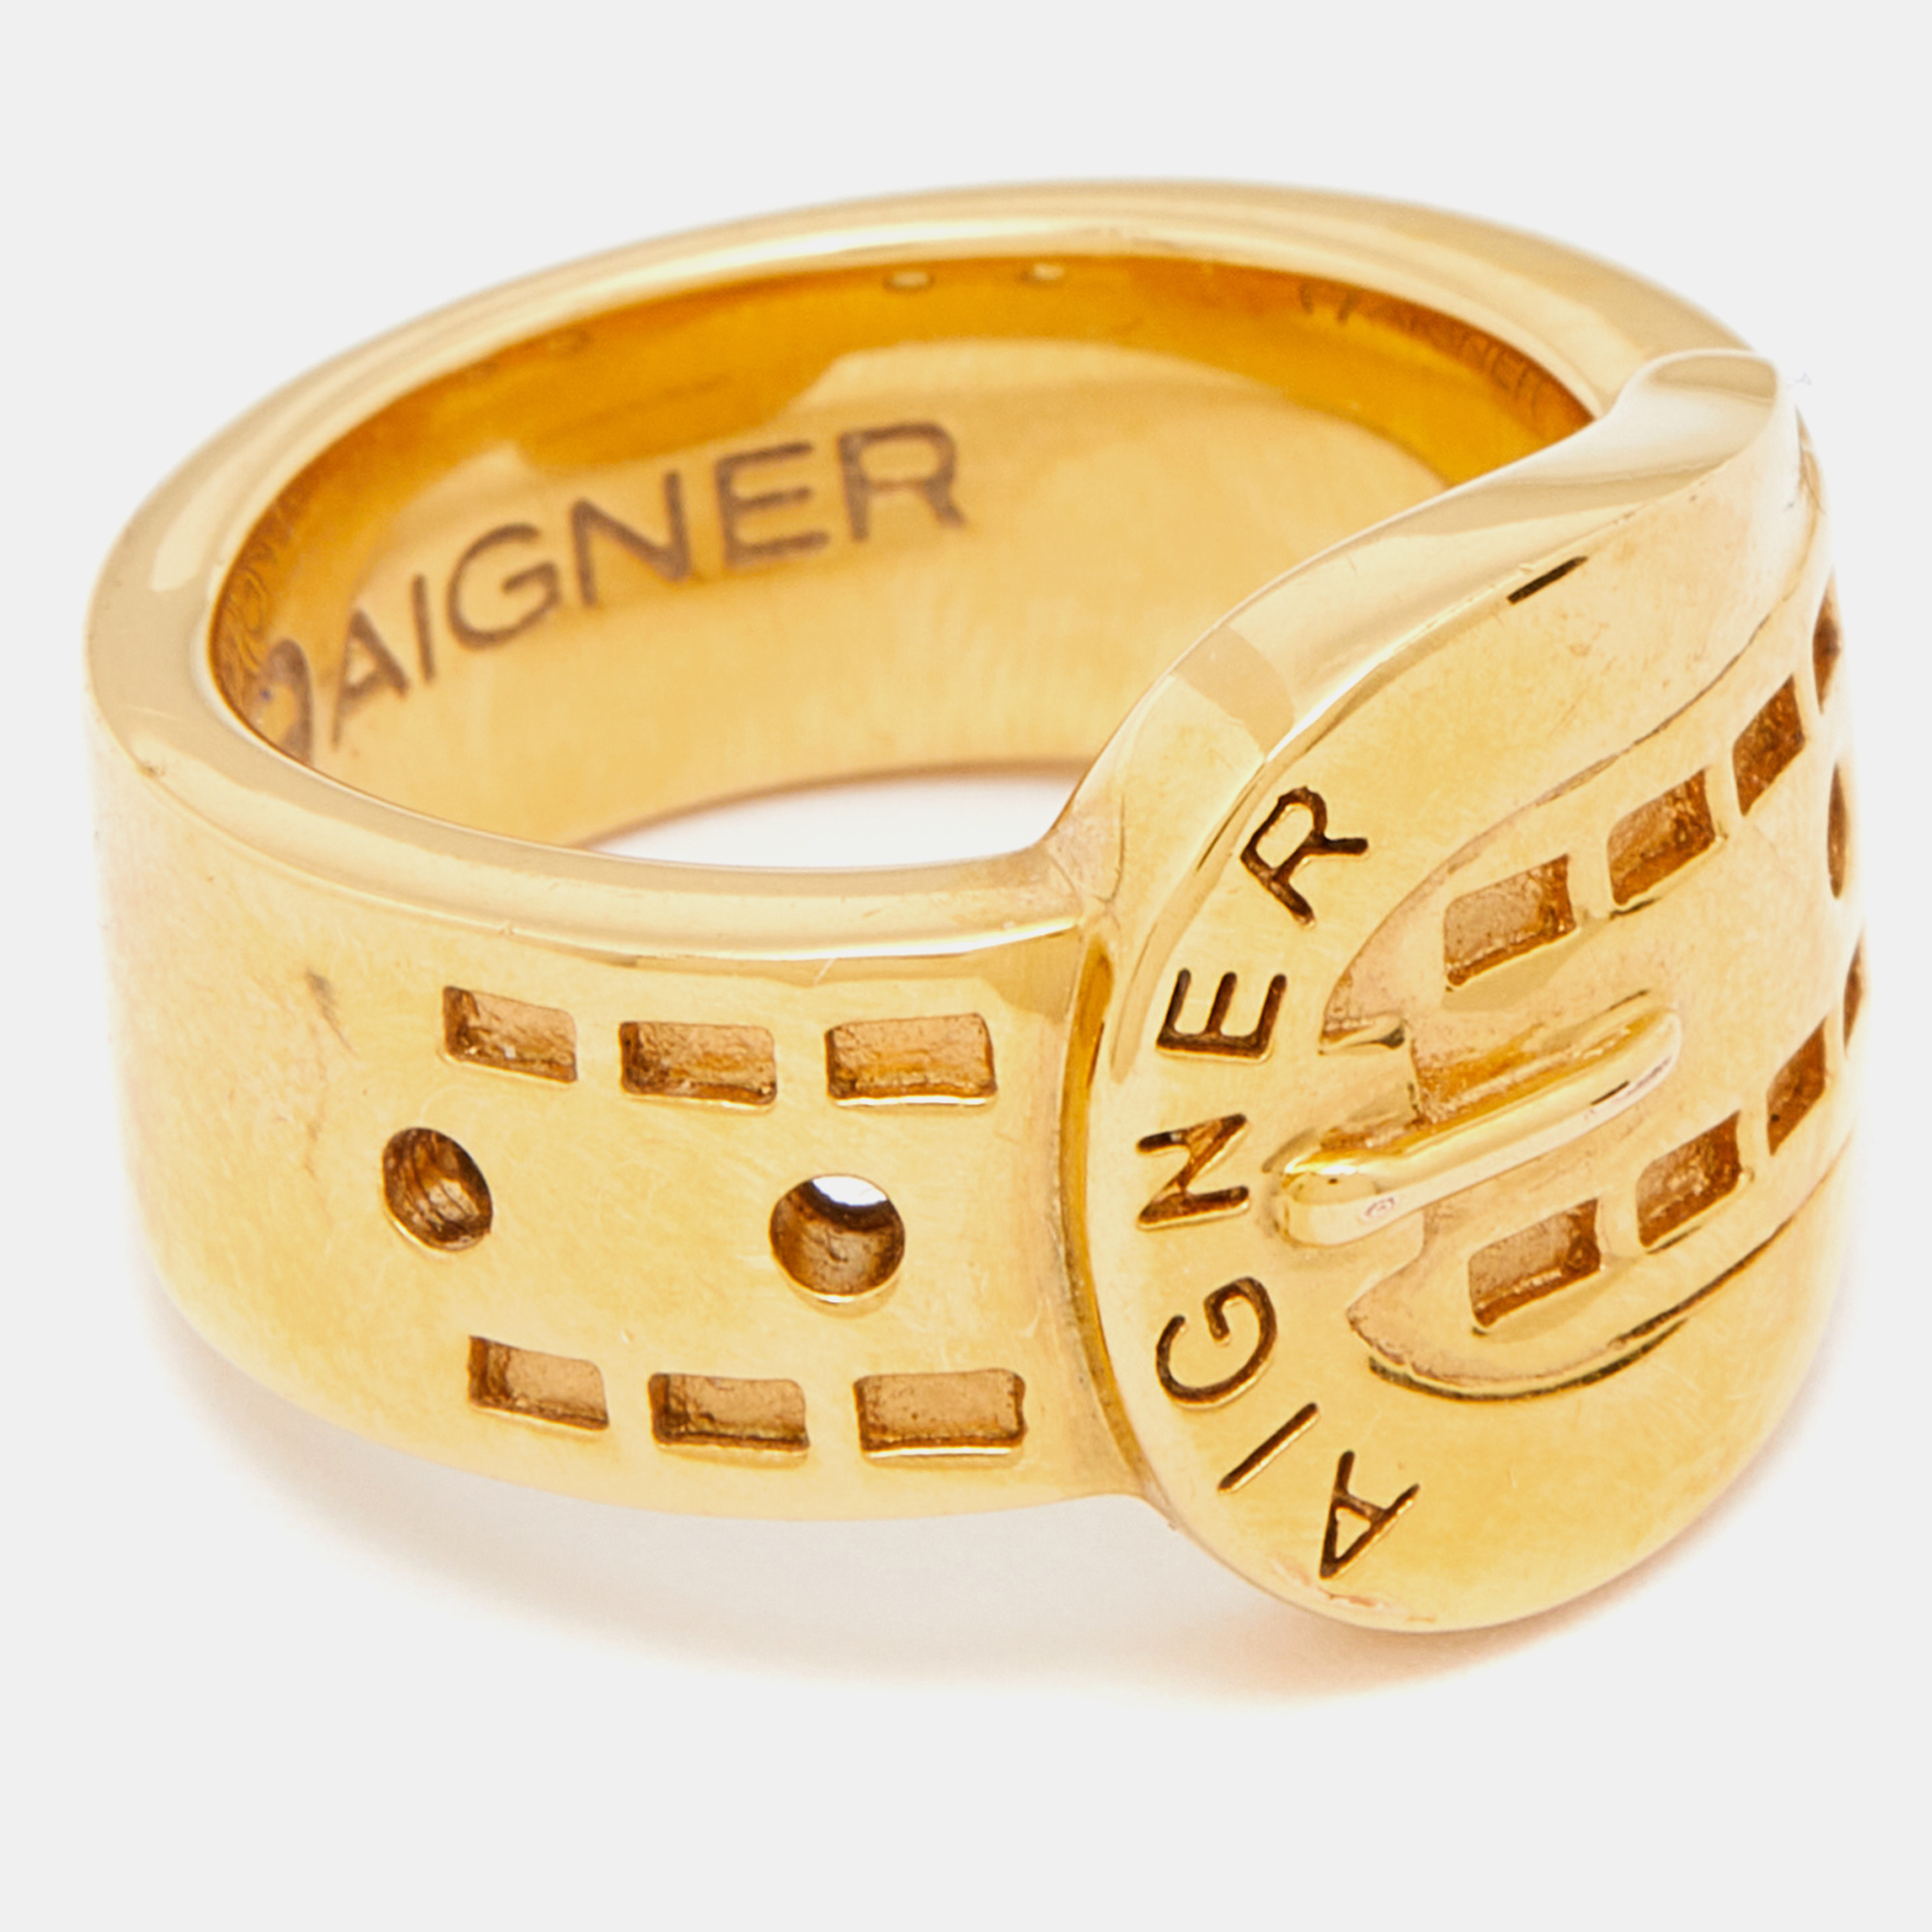 Aigner Gold Tone Belt Buckle Band Ring Size 53